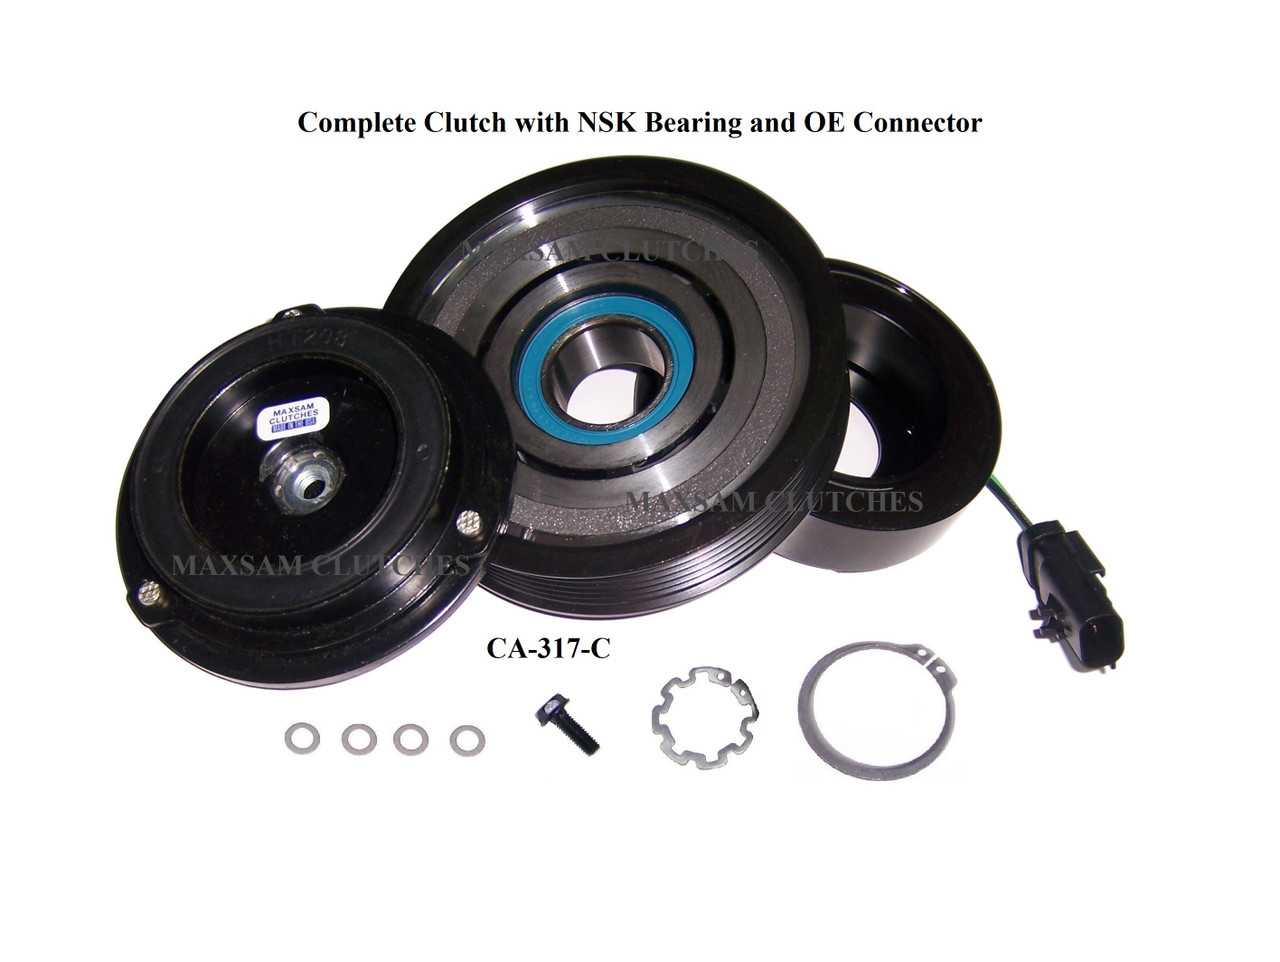 Dodge Avenger 2011 - 2014 3.6 Liter, AC Compressor Complete CLUTCH (Read Details) Made by Maxsam Clutches in the USA